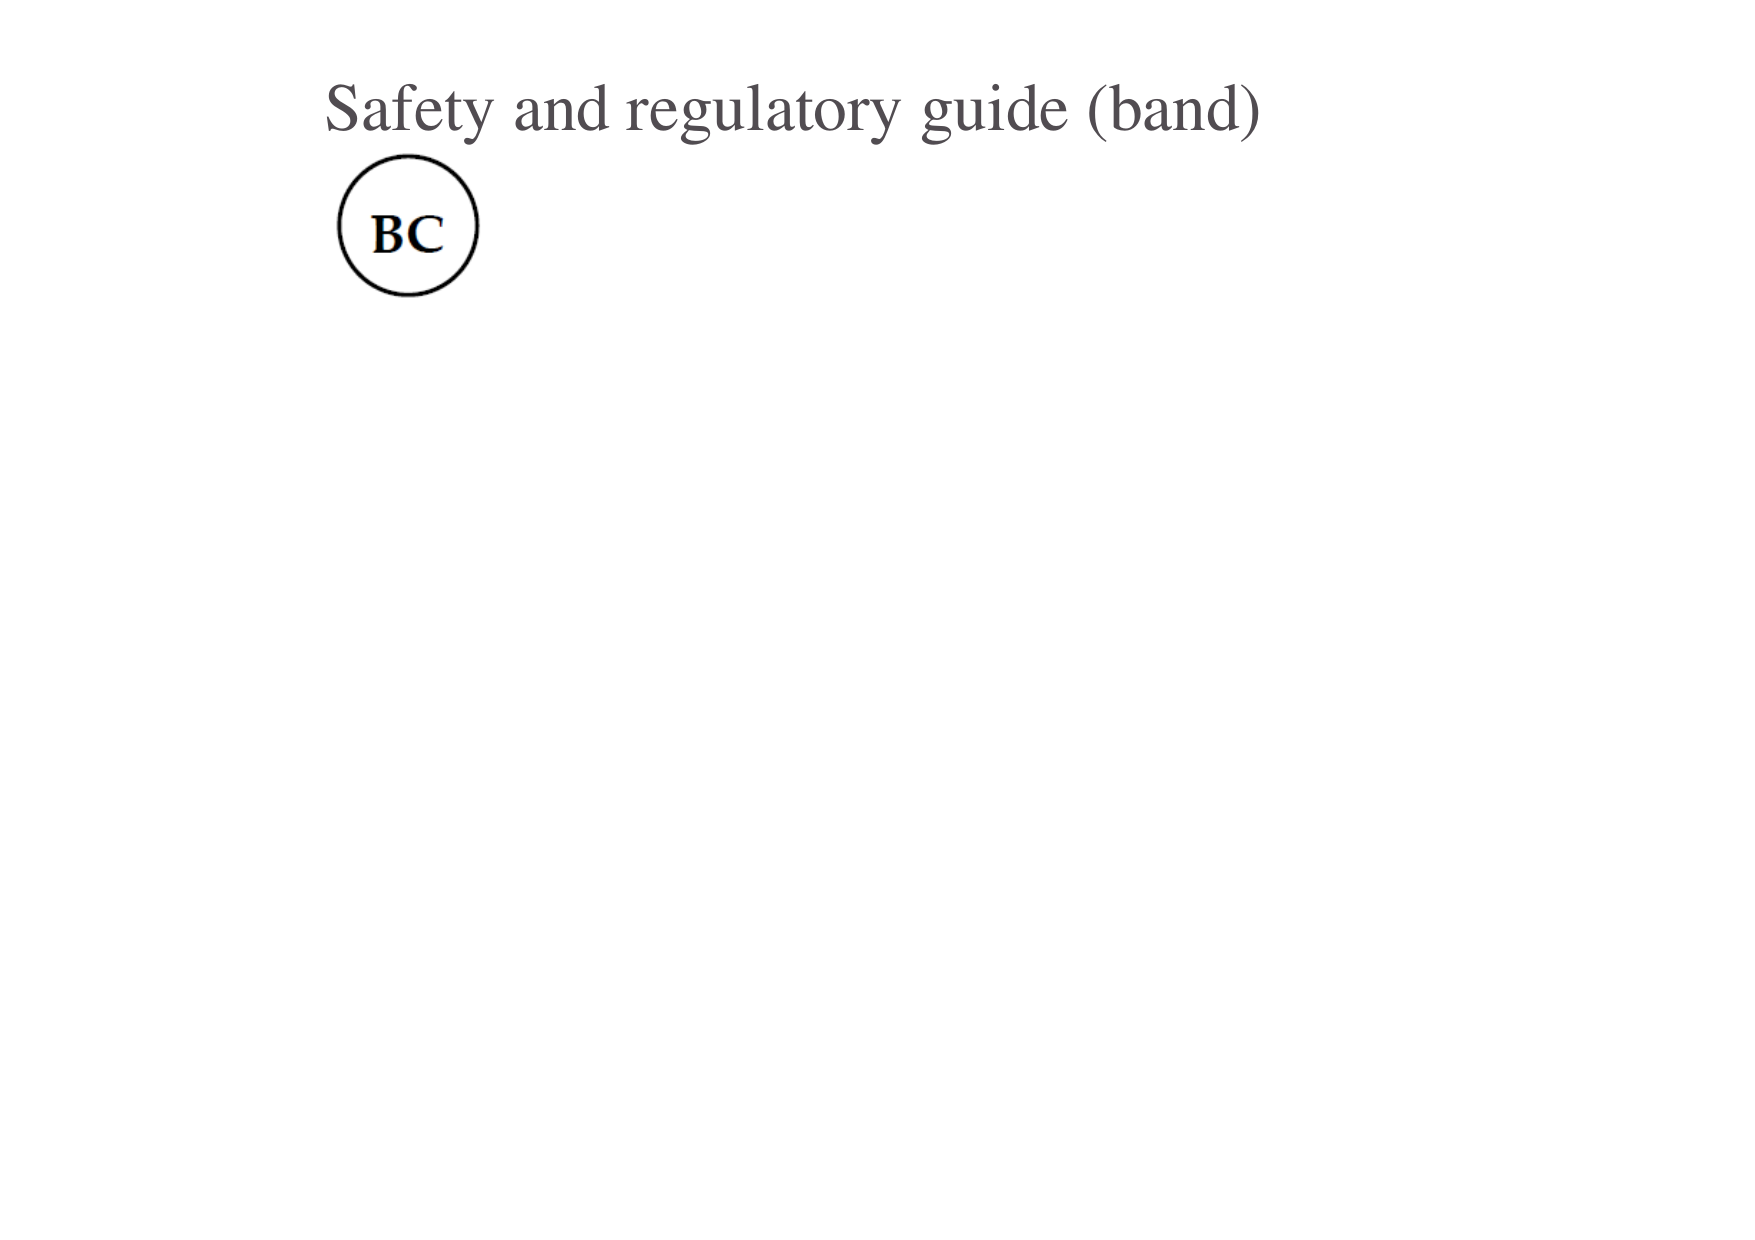  Safety and regulatory guide (band)             